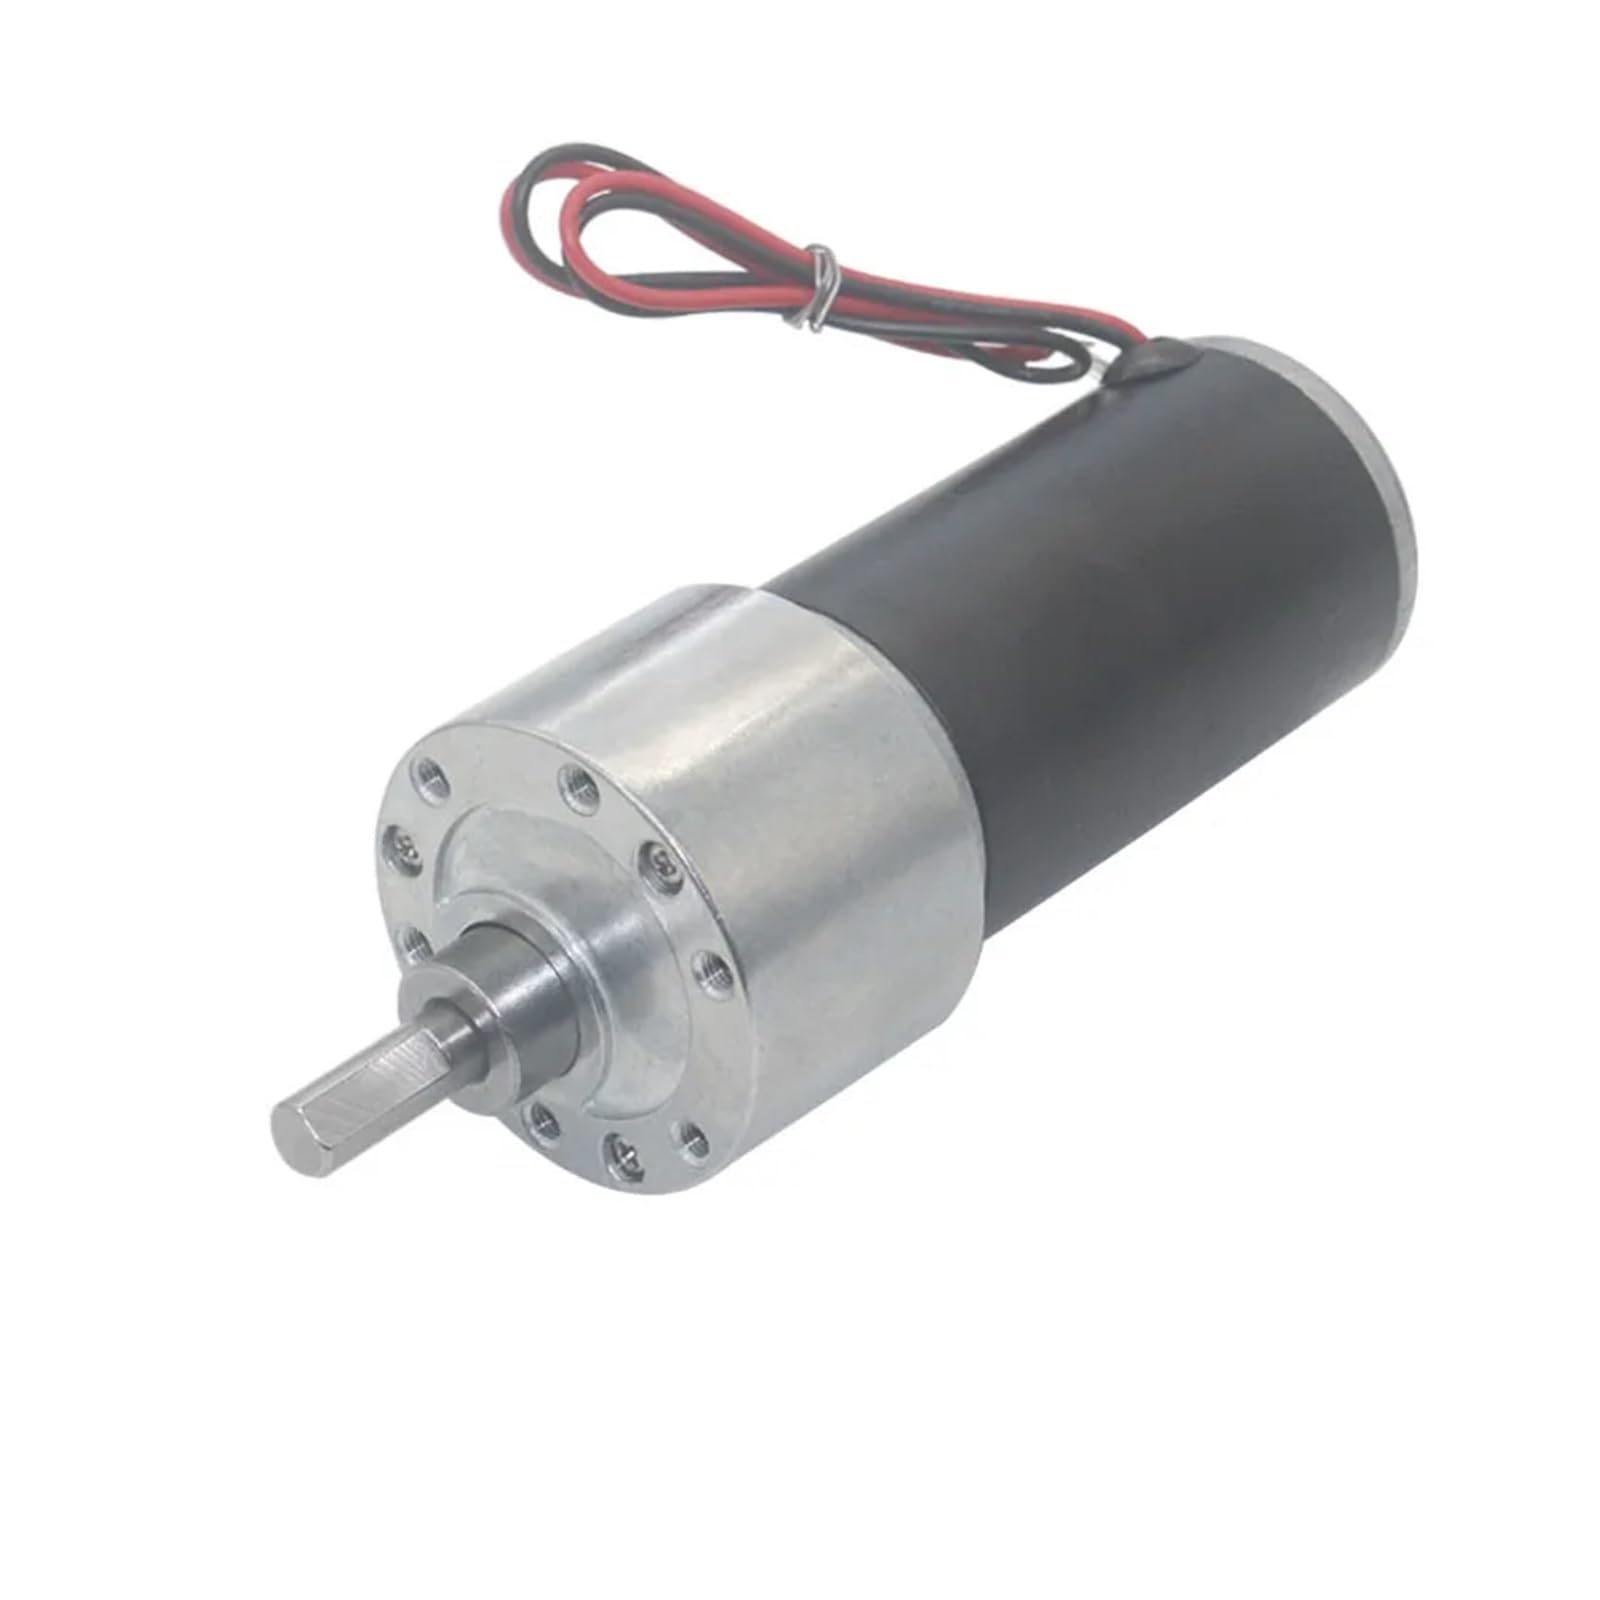 DC 12V 24V High Torque Metal Gearbox Reduction Gear electronic starter AUOQKQUT(140rpm,12V) von AUOQKQUT